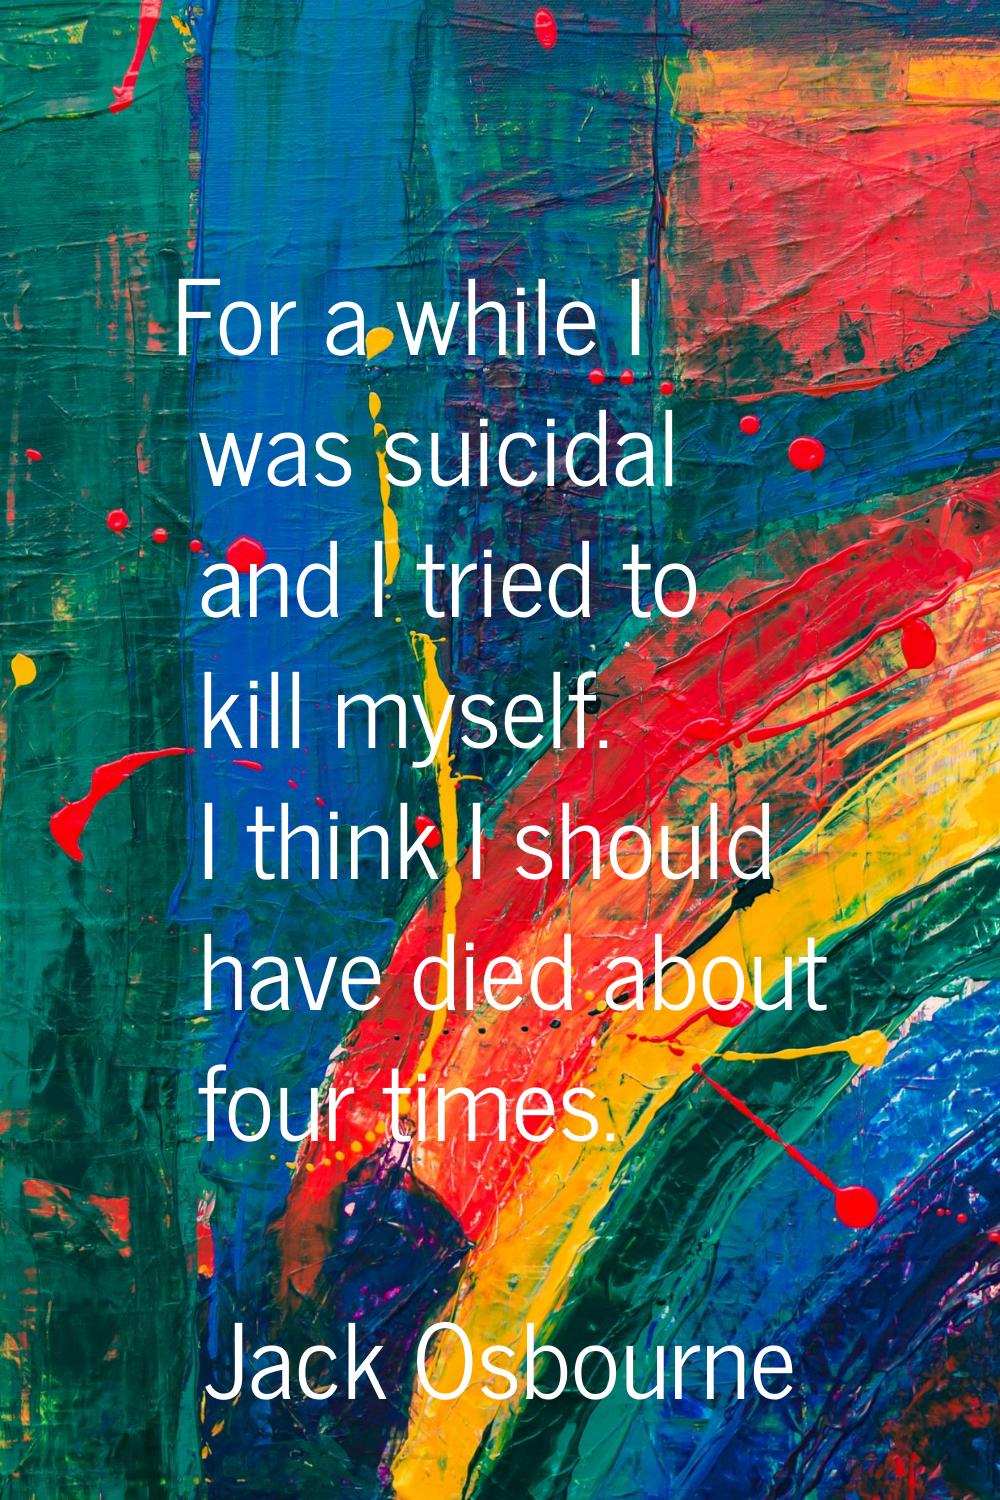 For a while I was suicidal and I tried to kill myself. I think I should have died about four times.